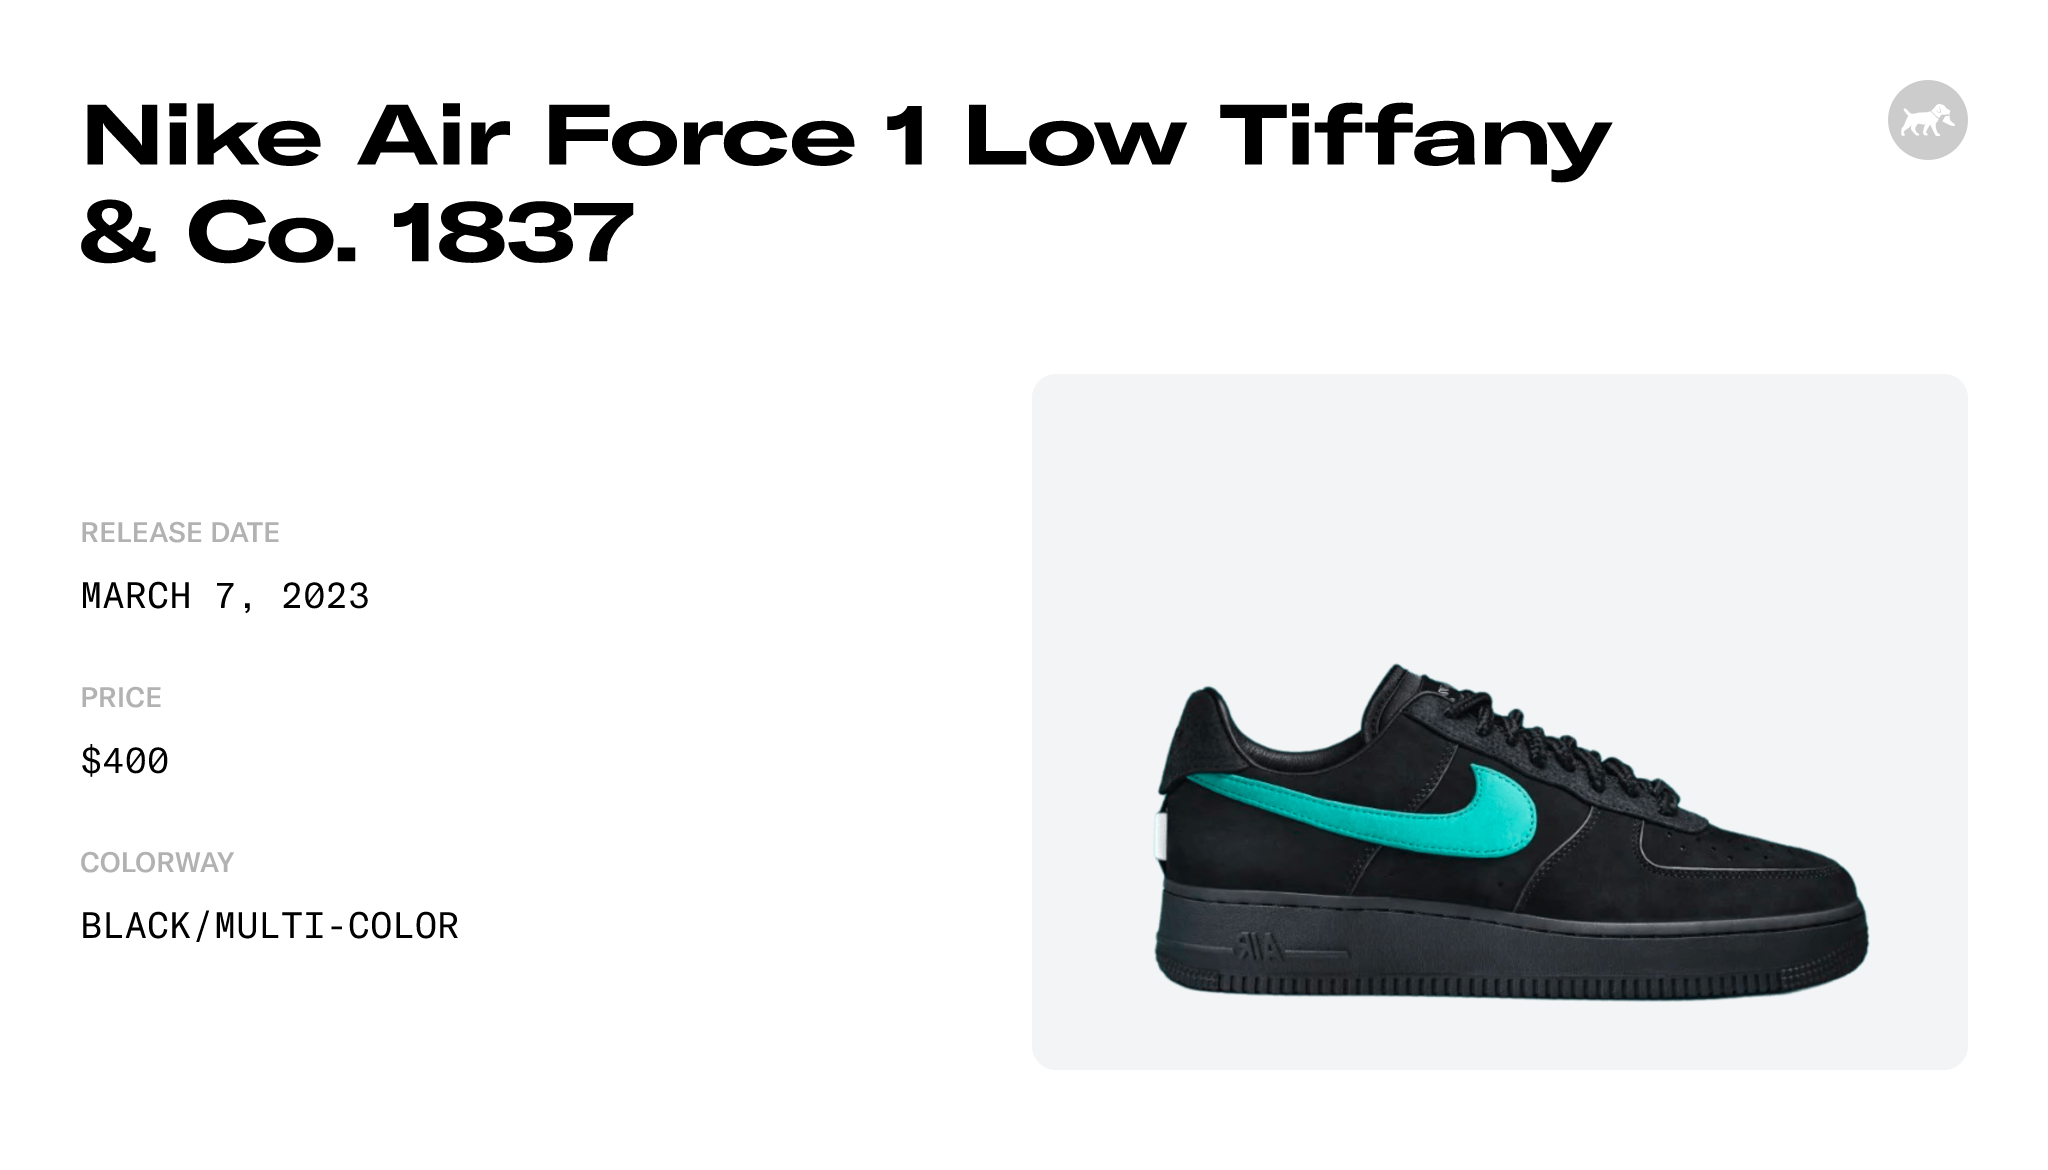 Size 8.5 - Nike Air Force 1 Low x Tiffany & Co. 1837 Ships Fast Wont  Wait a Week